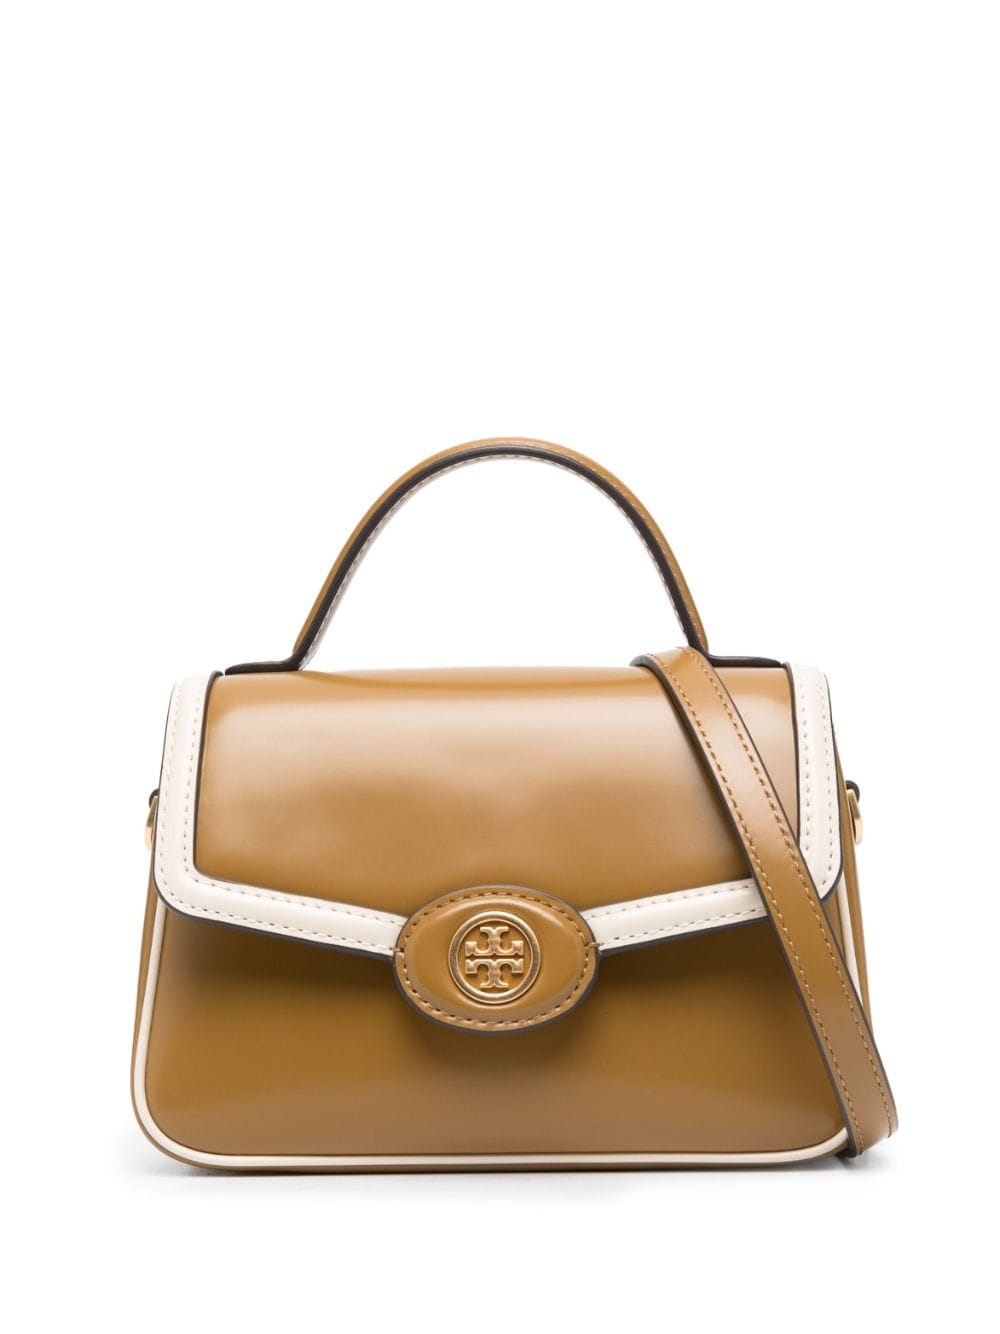 Tory Burch small Robinson leather shoulder bag - Brown von Tory Burch